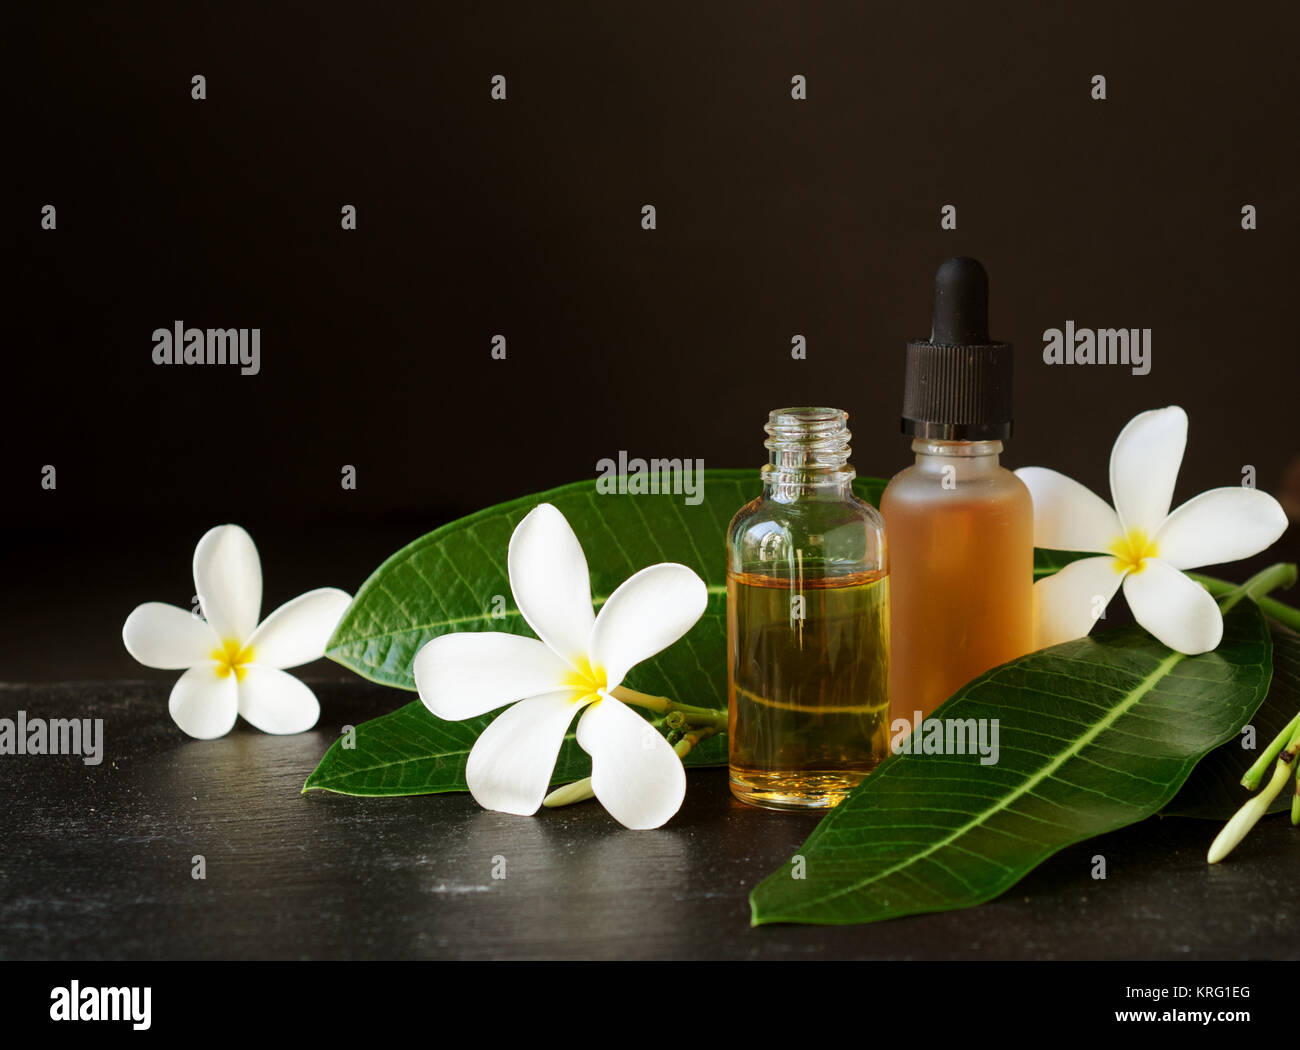 small glass jars with oil and Frangipani Plumeria patchouli flowers for spa treatments on a black background, selective focus Stock Photo